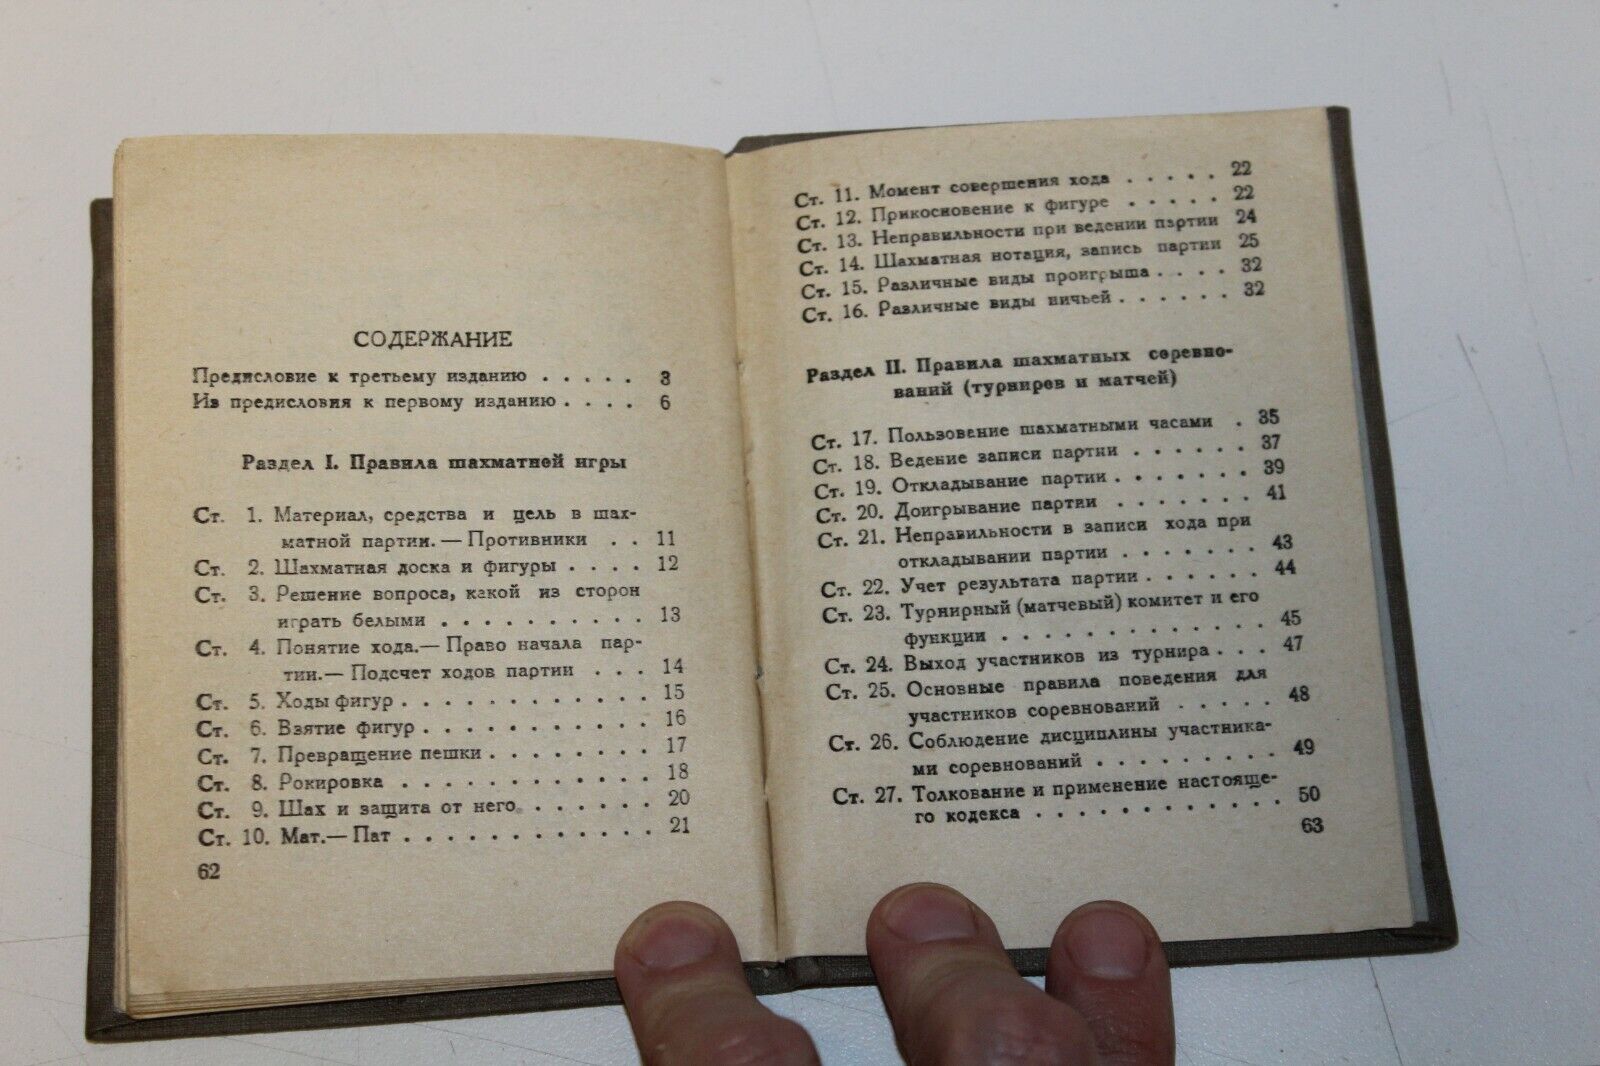 11076.Chess book: Horev library. N.Zubarev. 1936 Unified chess code of the USSR